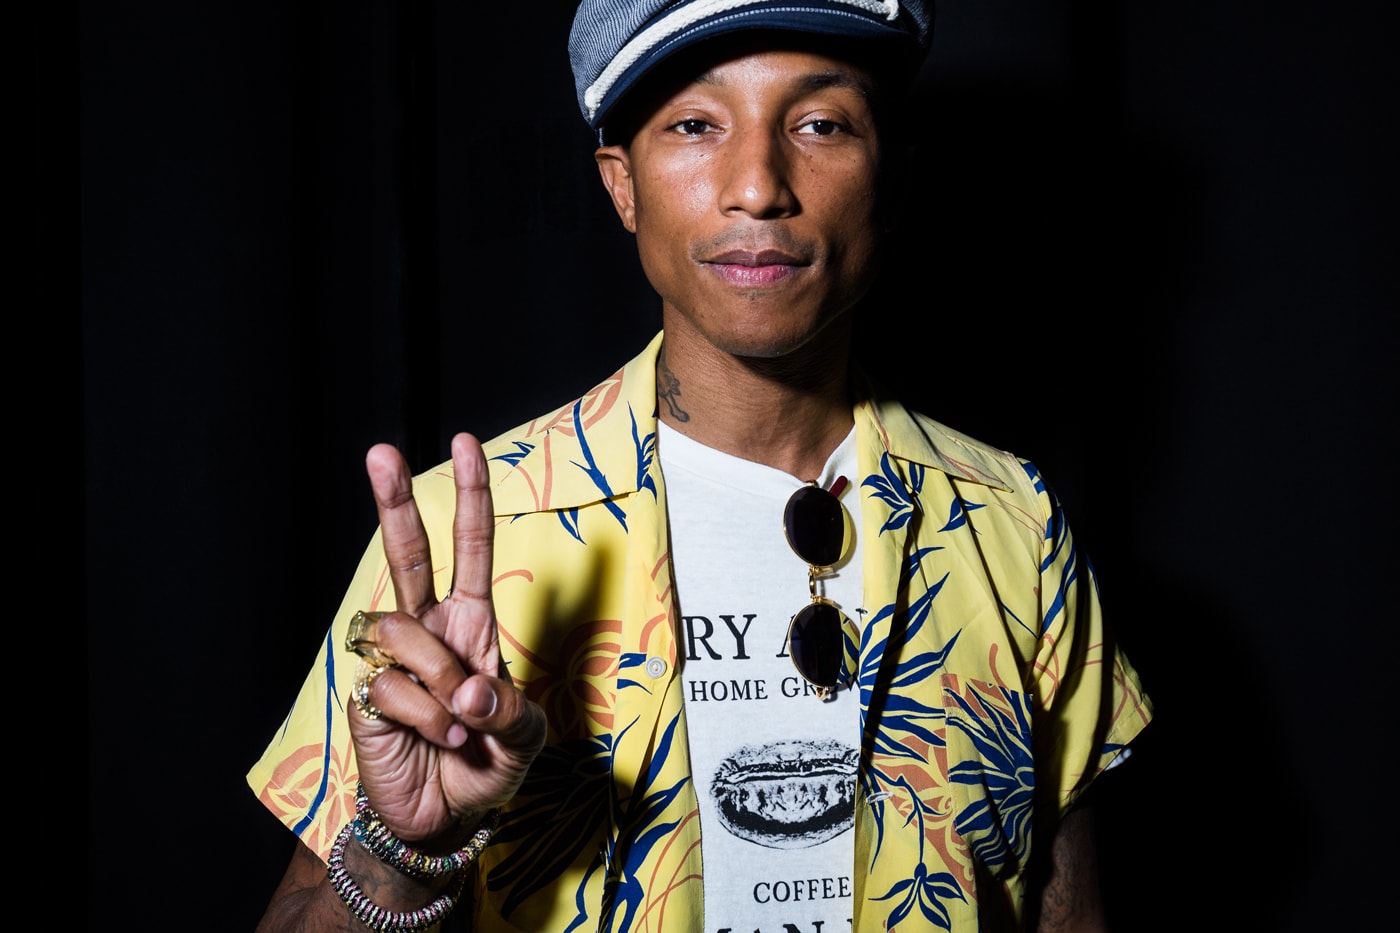 Pharrell Williams' Contribution to the "Despicable Me" Soundtrack